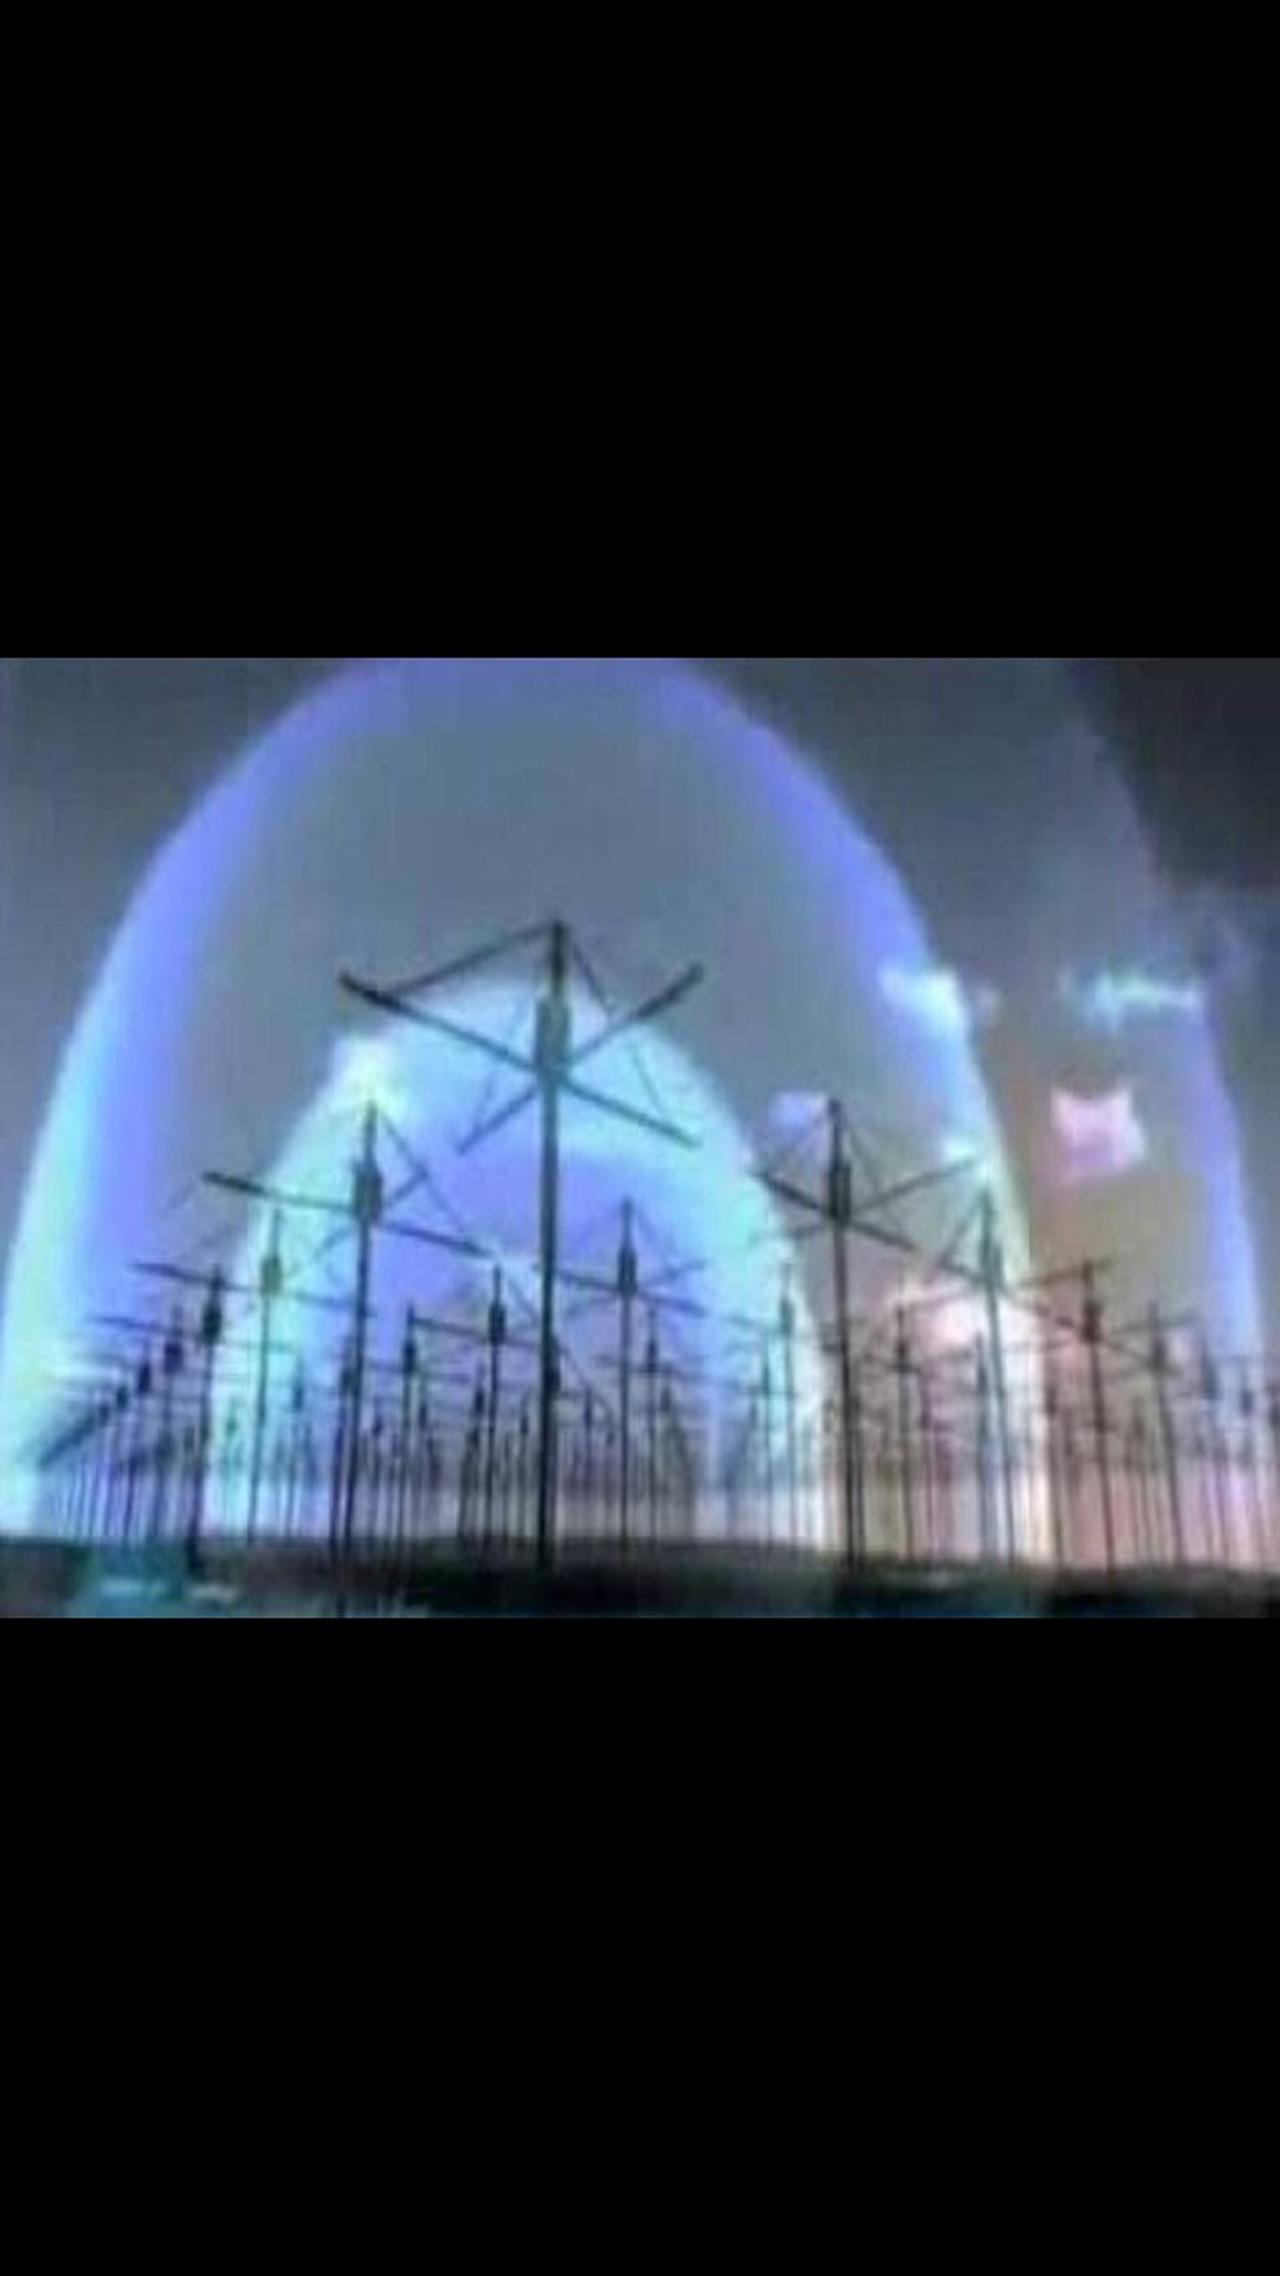 HAARP WEAPON OVER TURKEY PRIOR TO EARTHQUAKE?